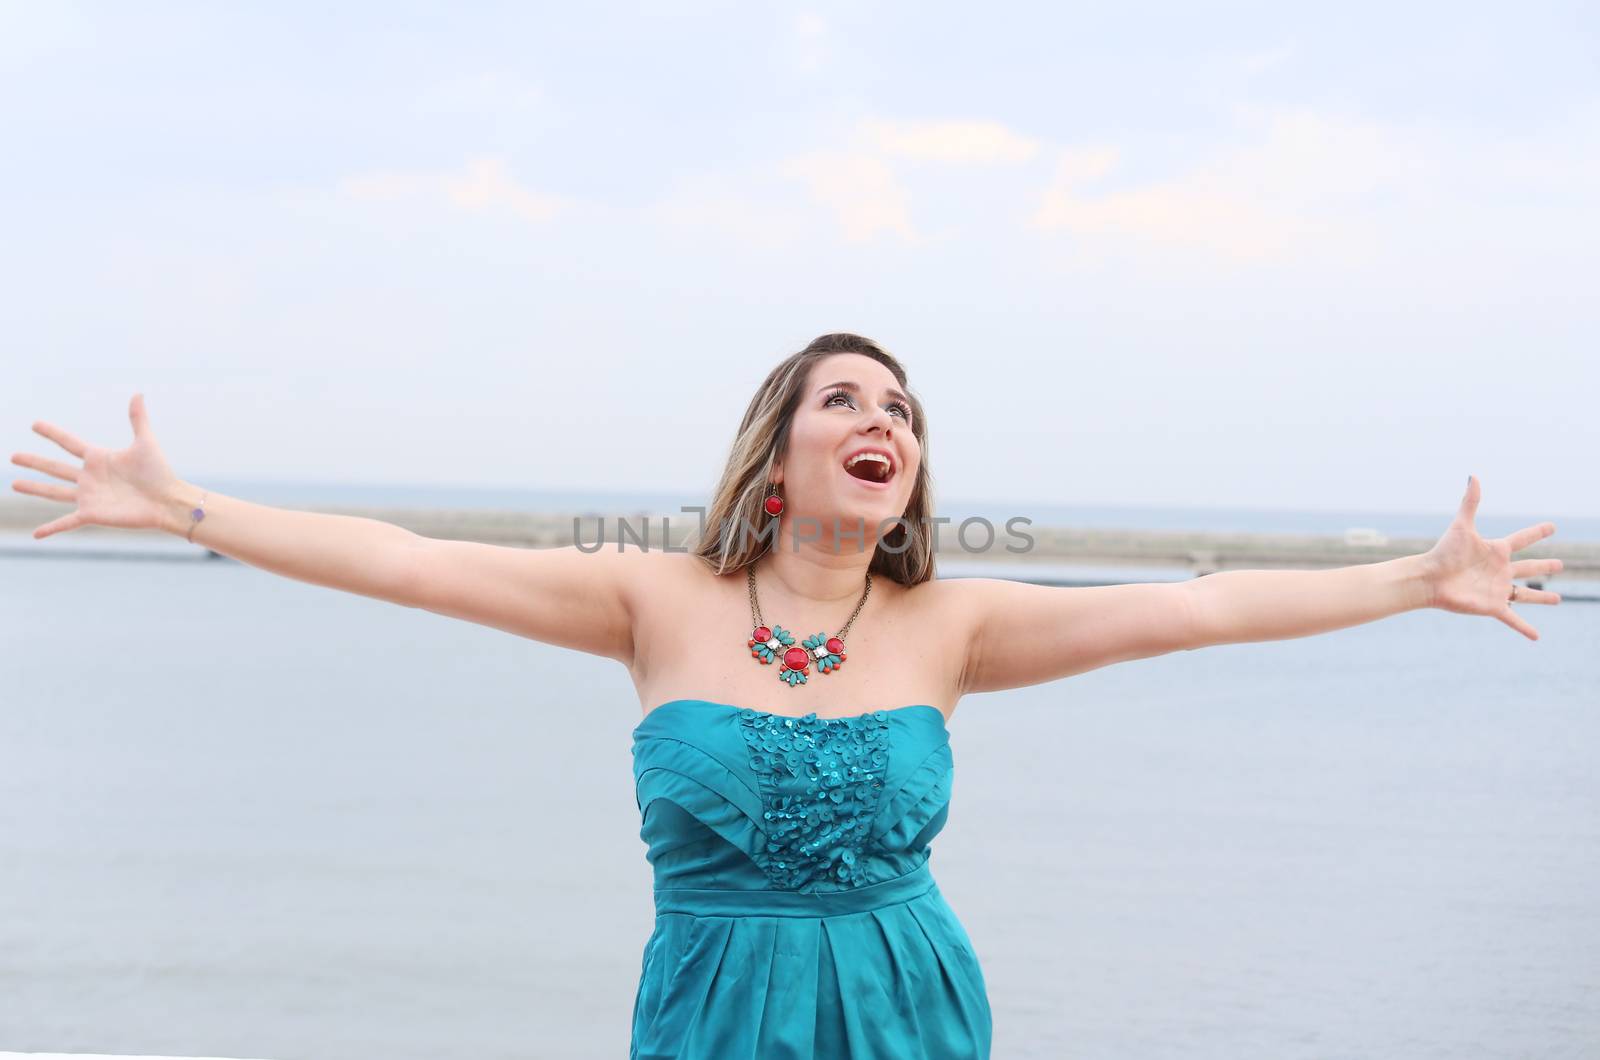 Happy woman with open arms looking at the sky